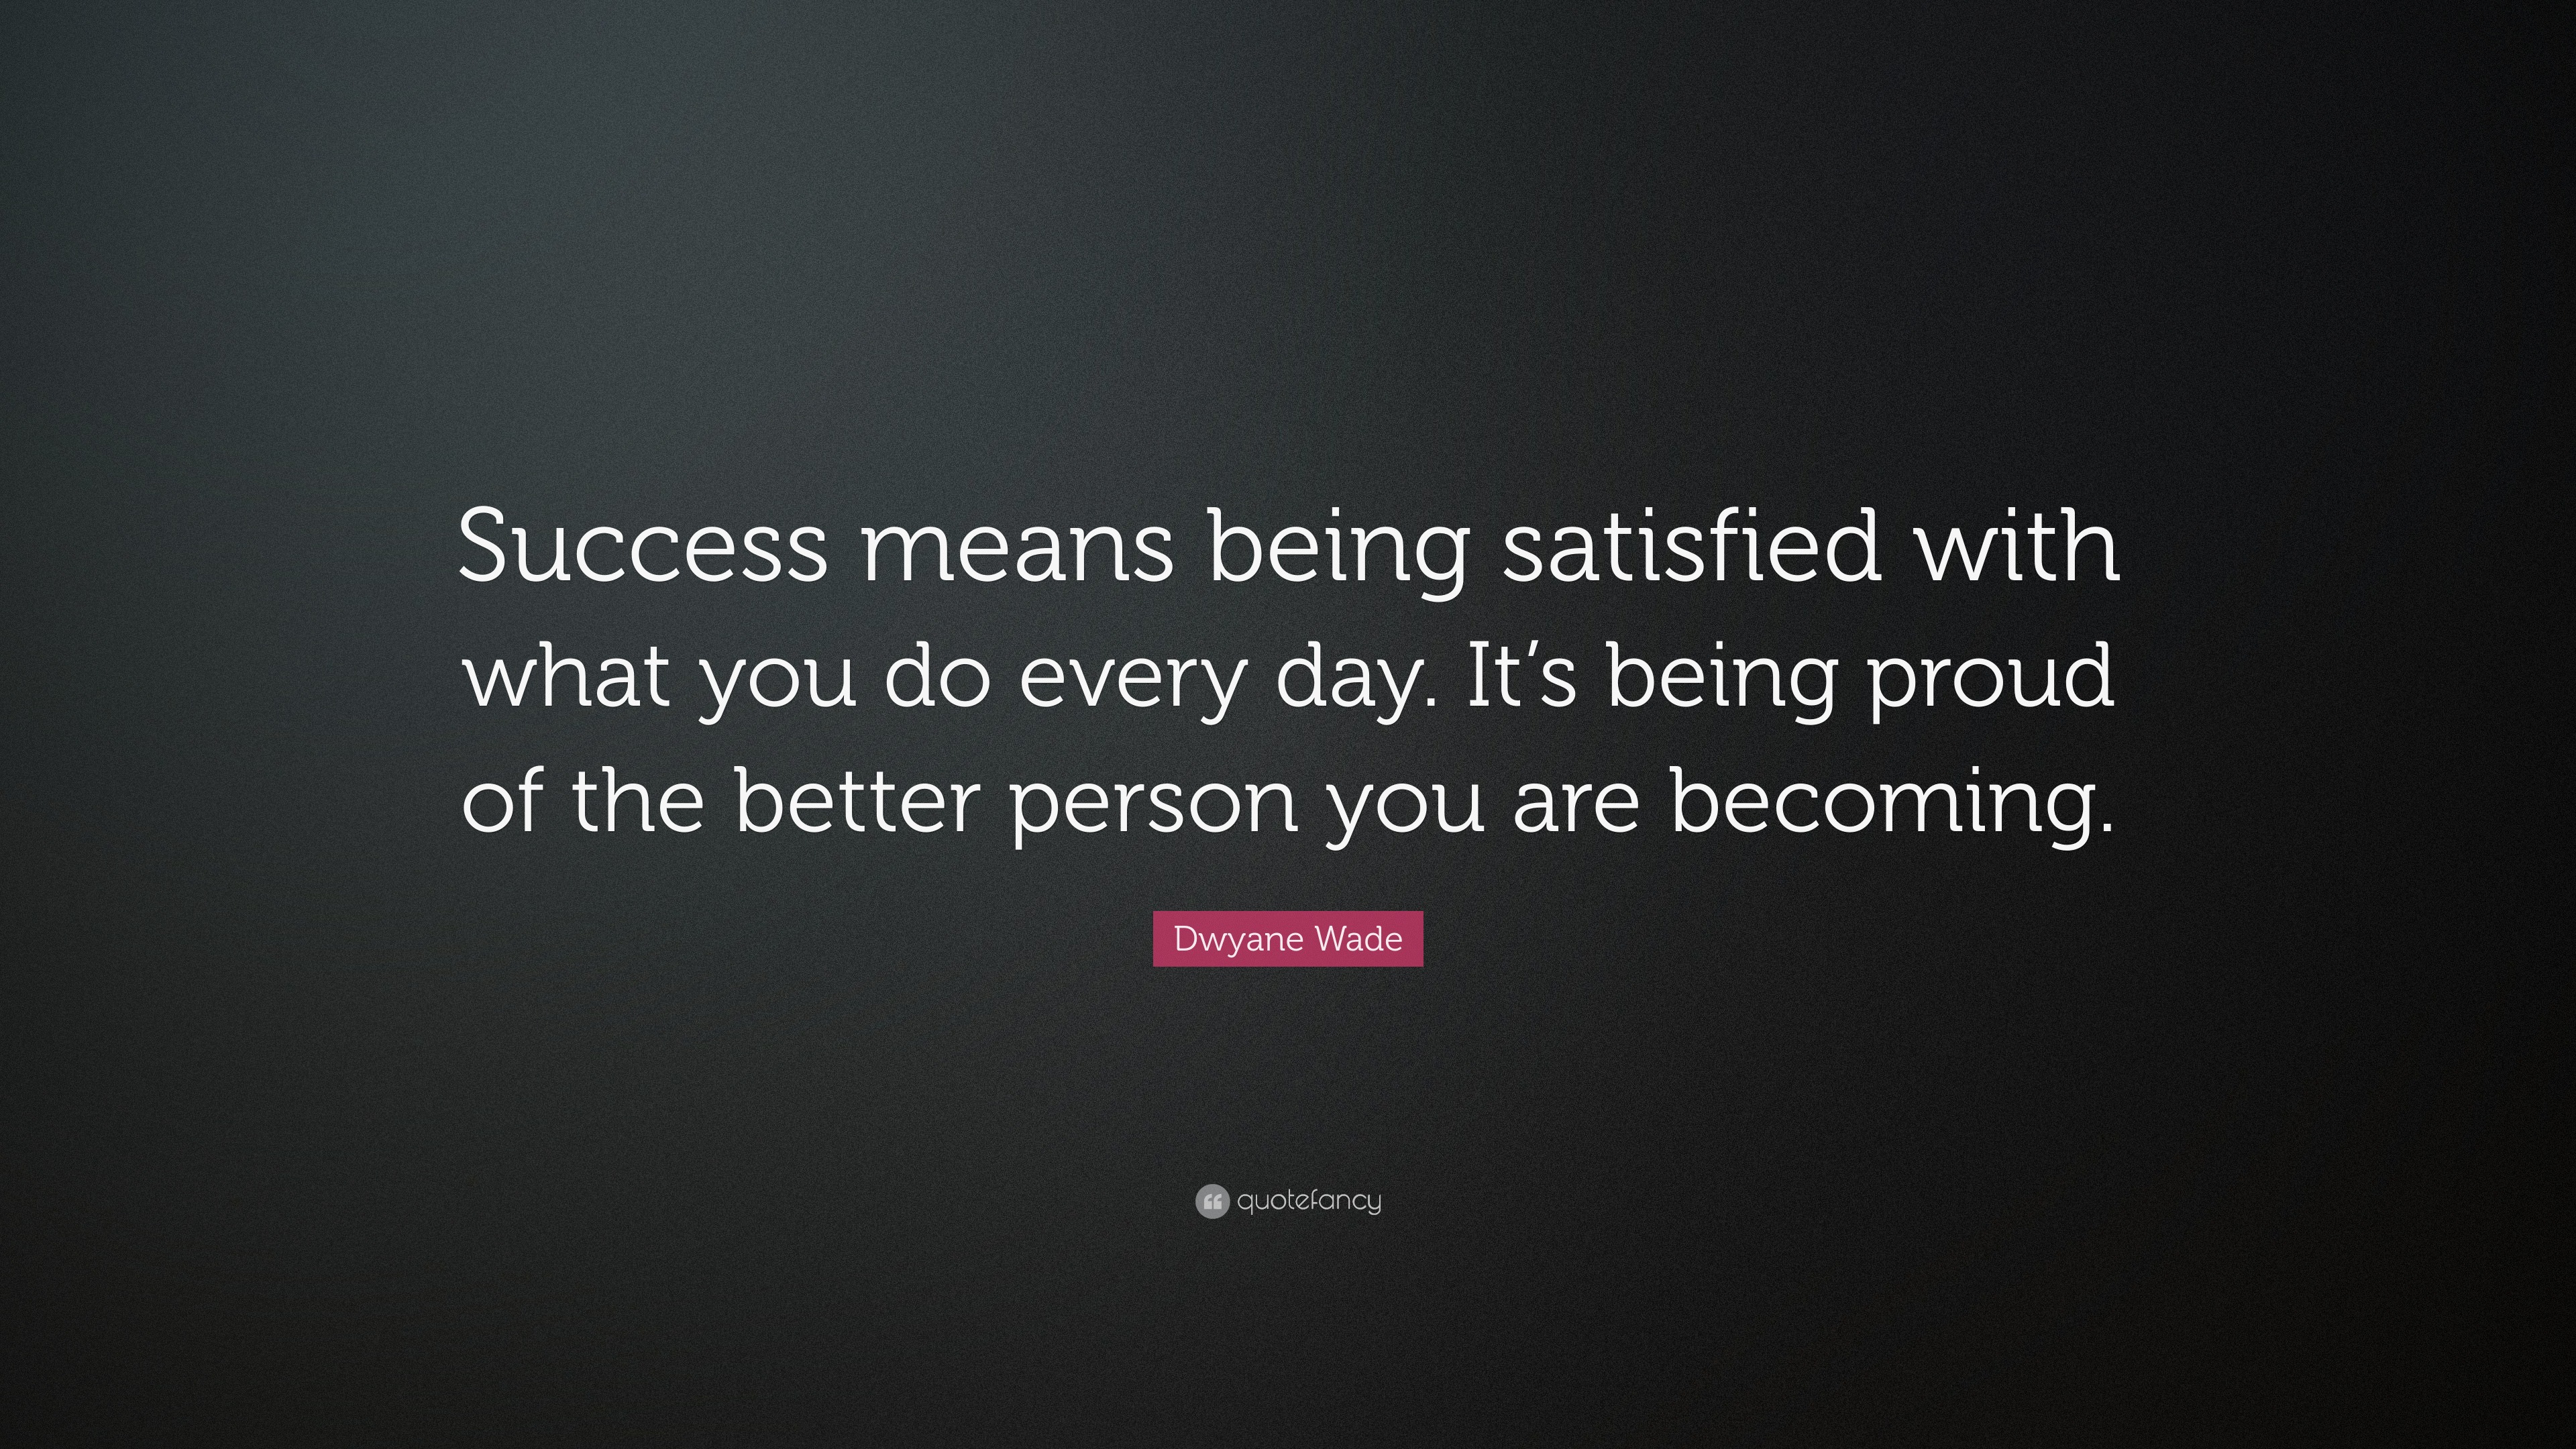 Dwyane Wade Quote: “Success means being satisfied with what you do ...